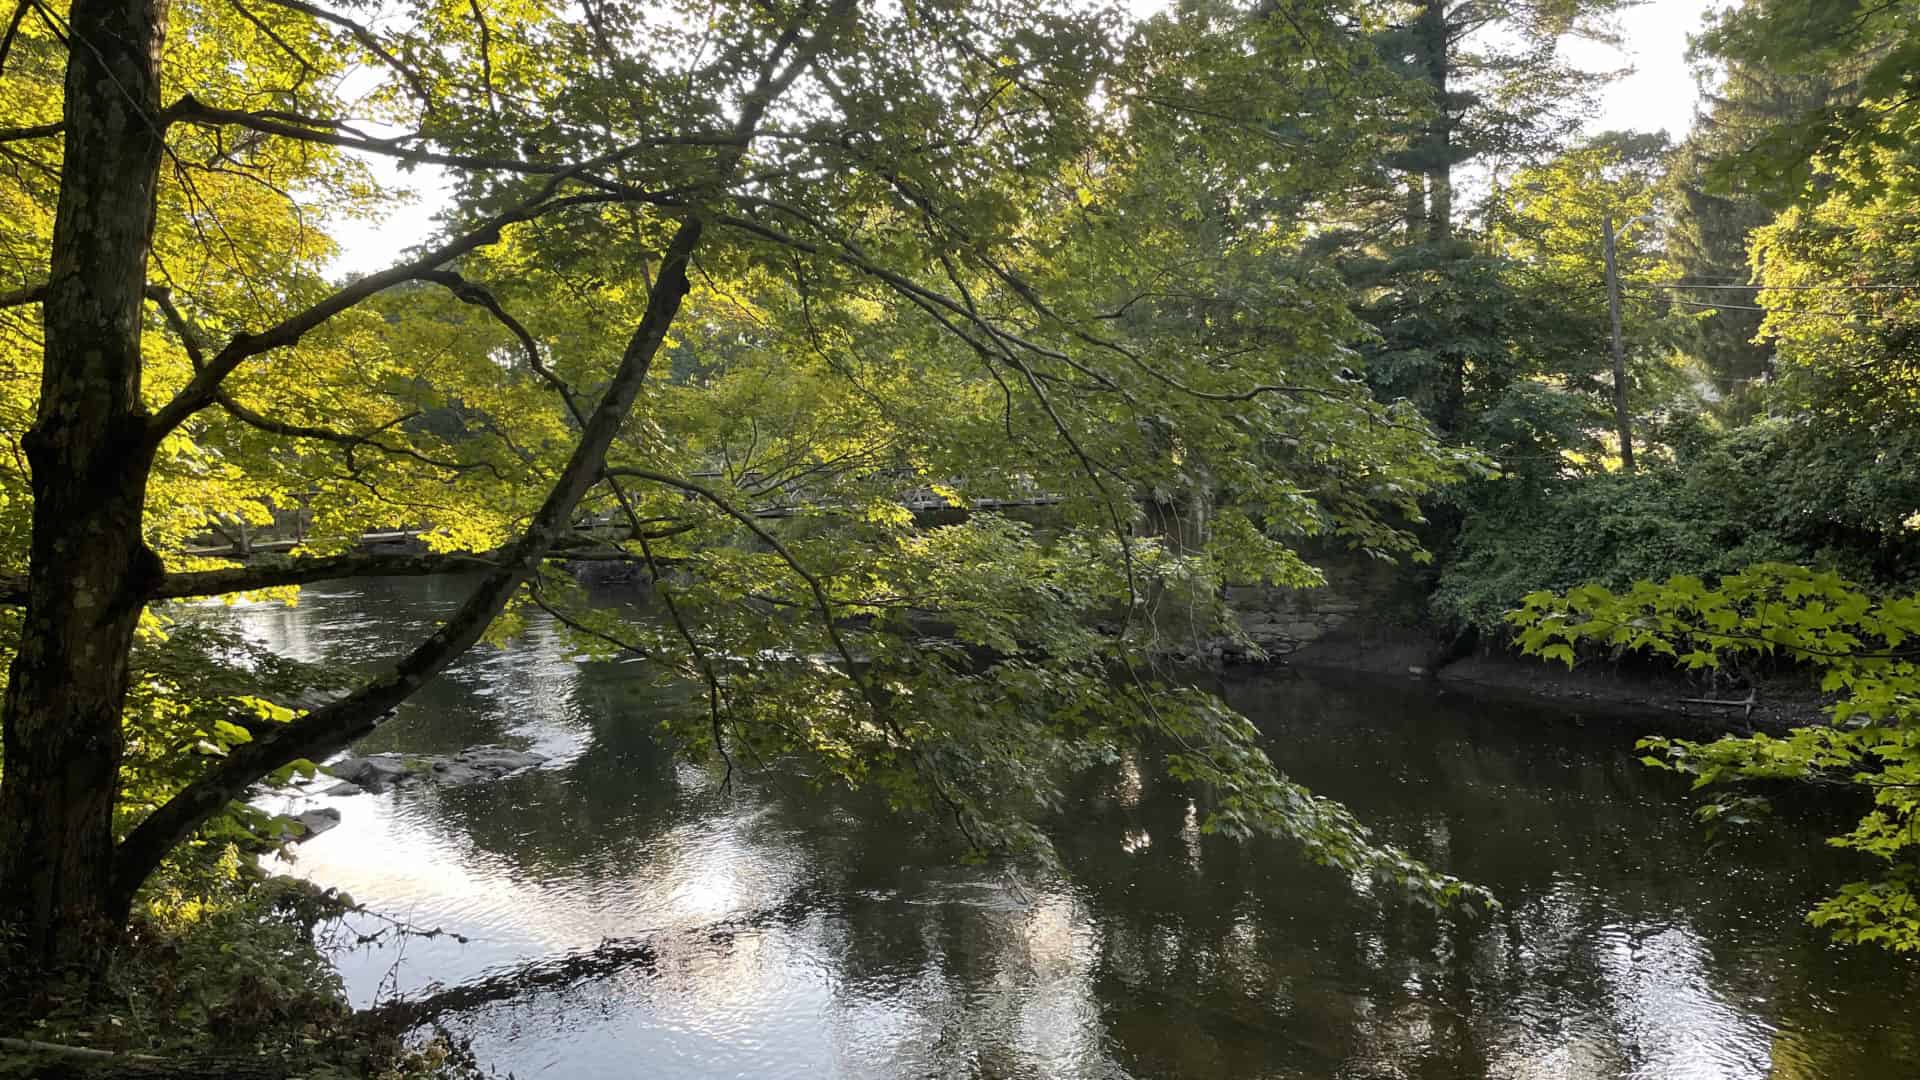 The Housatonic River reflects overhanging branches in the golden hour in Stockbridge.